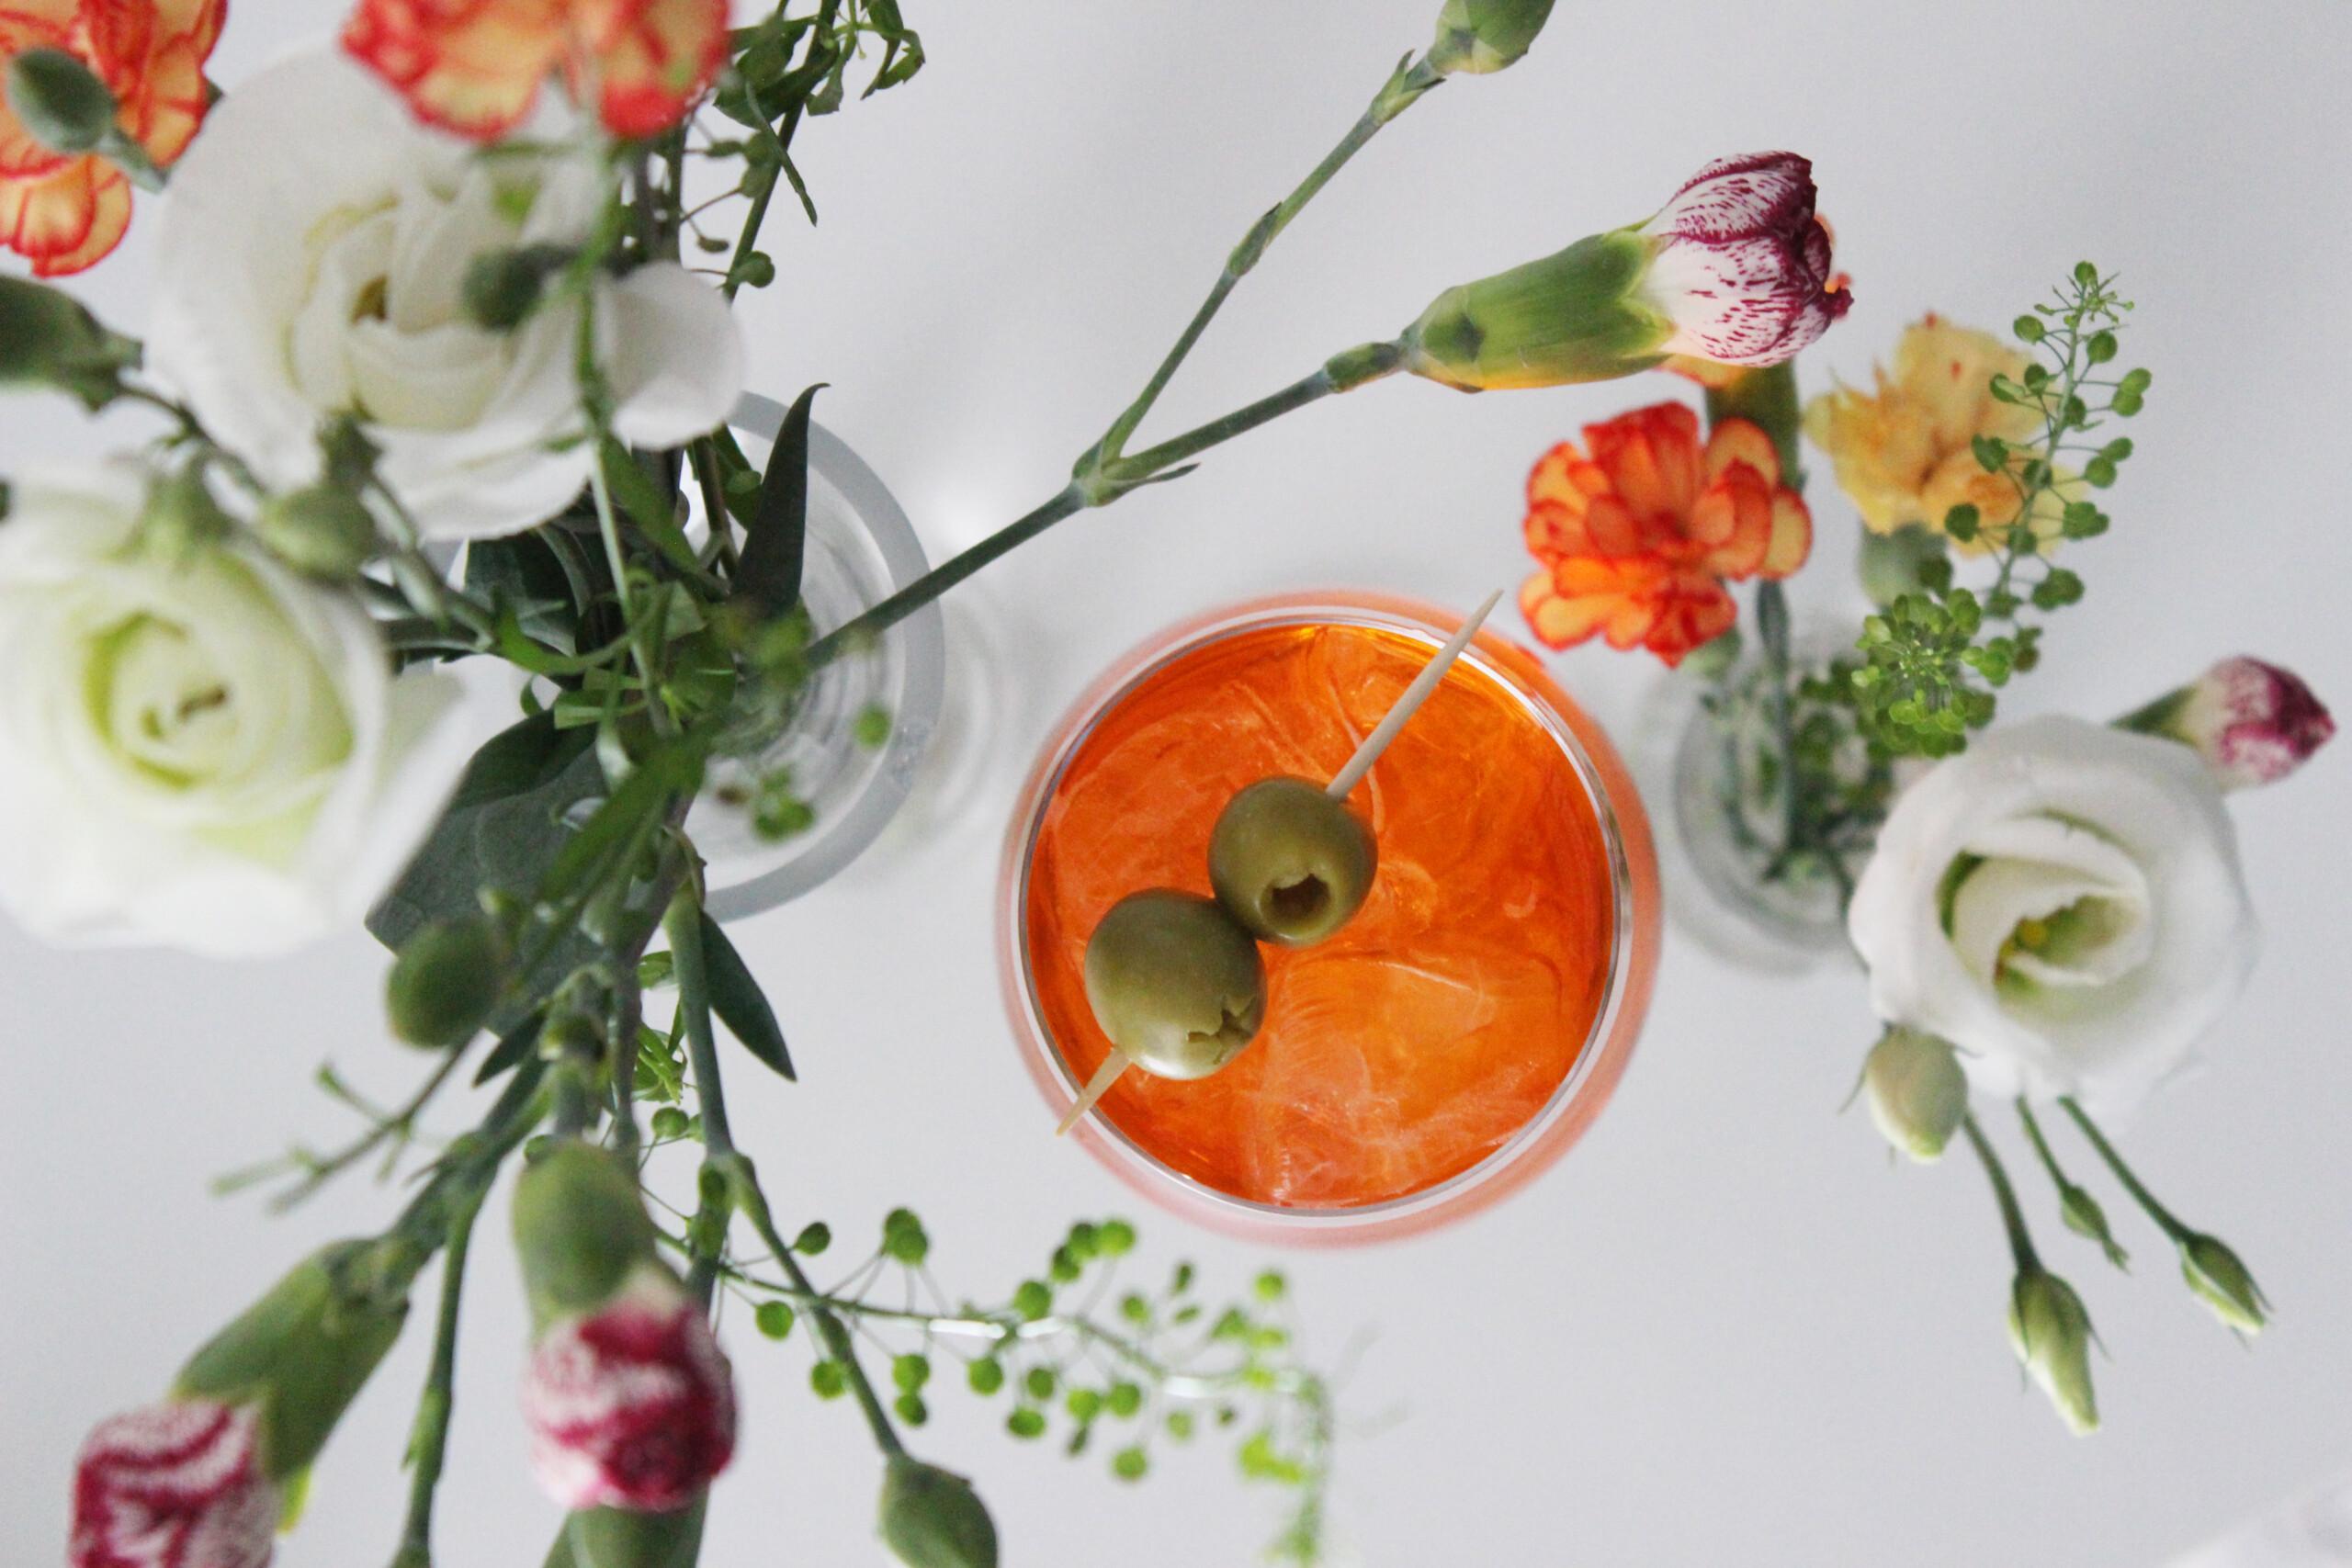 A glass filled with orange drink and two olives on top, viewed from above. There are two glass vases filled with flowers on either side of the glass.